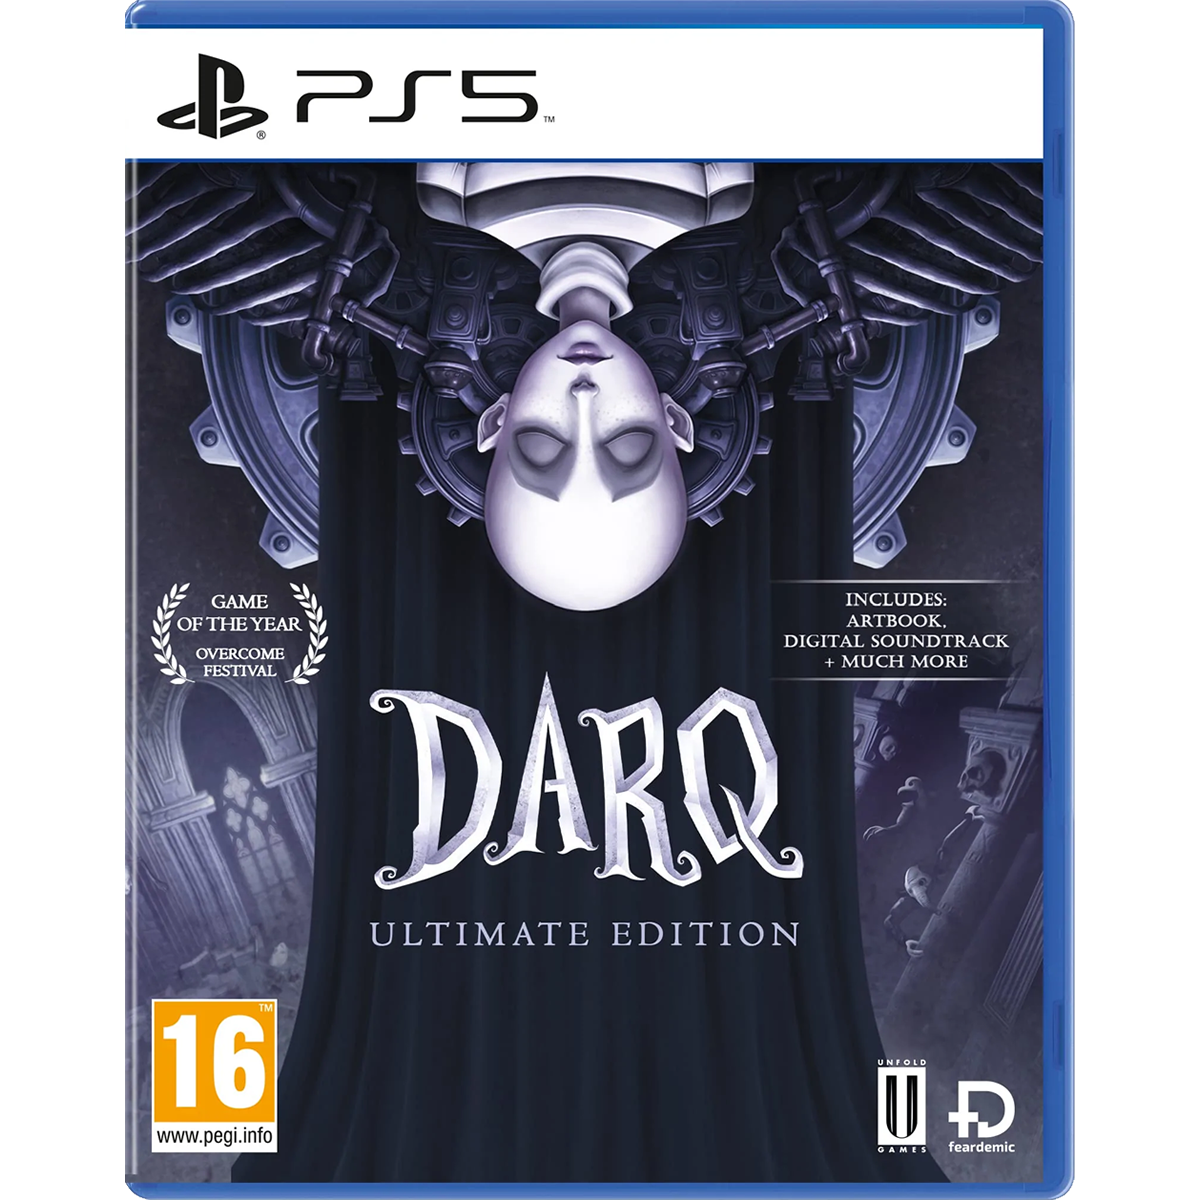 PS5 Darq Ultimate Edition